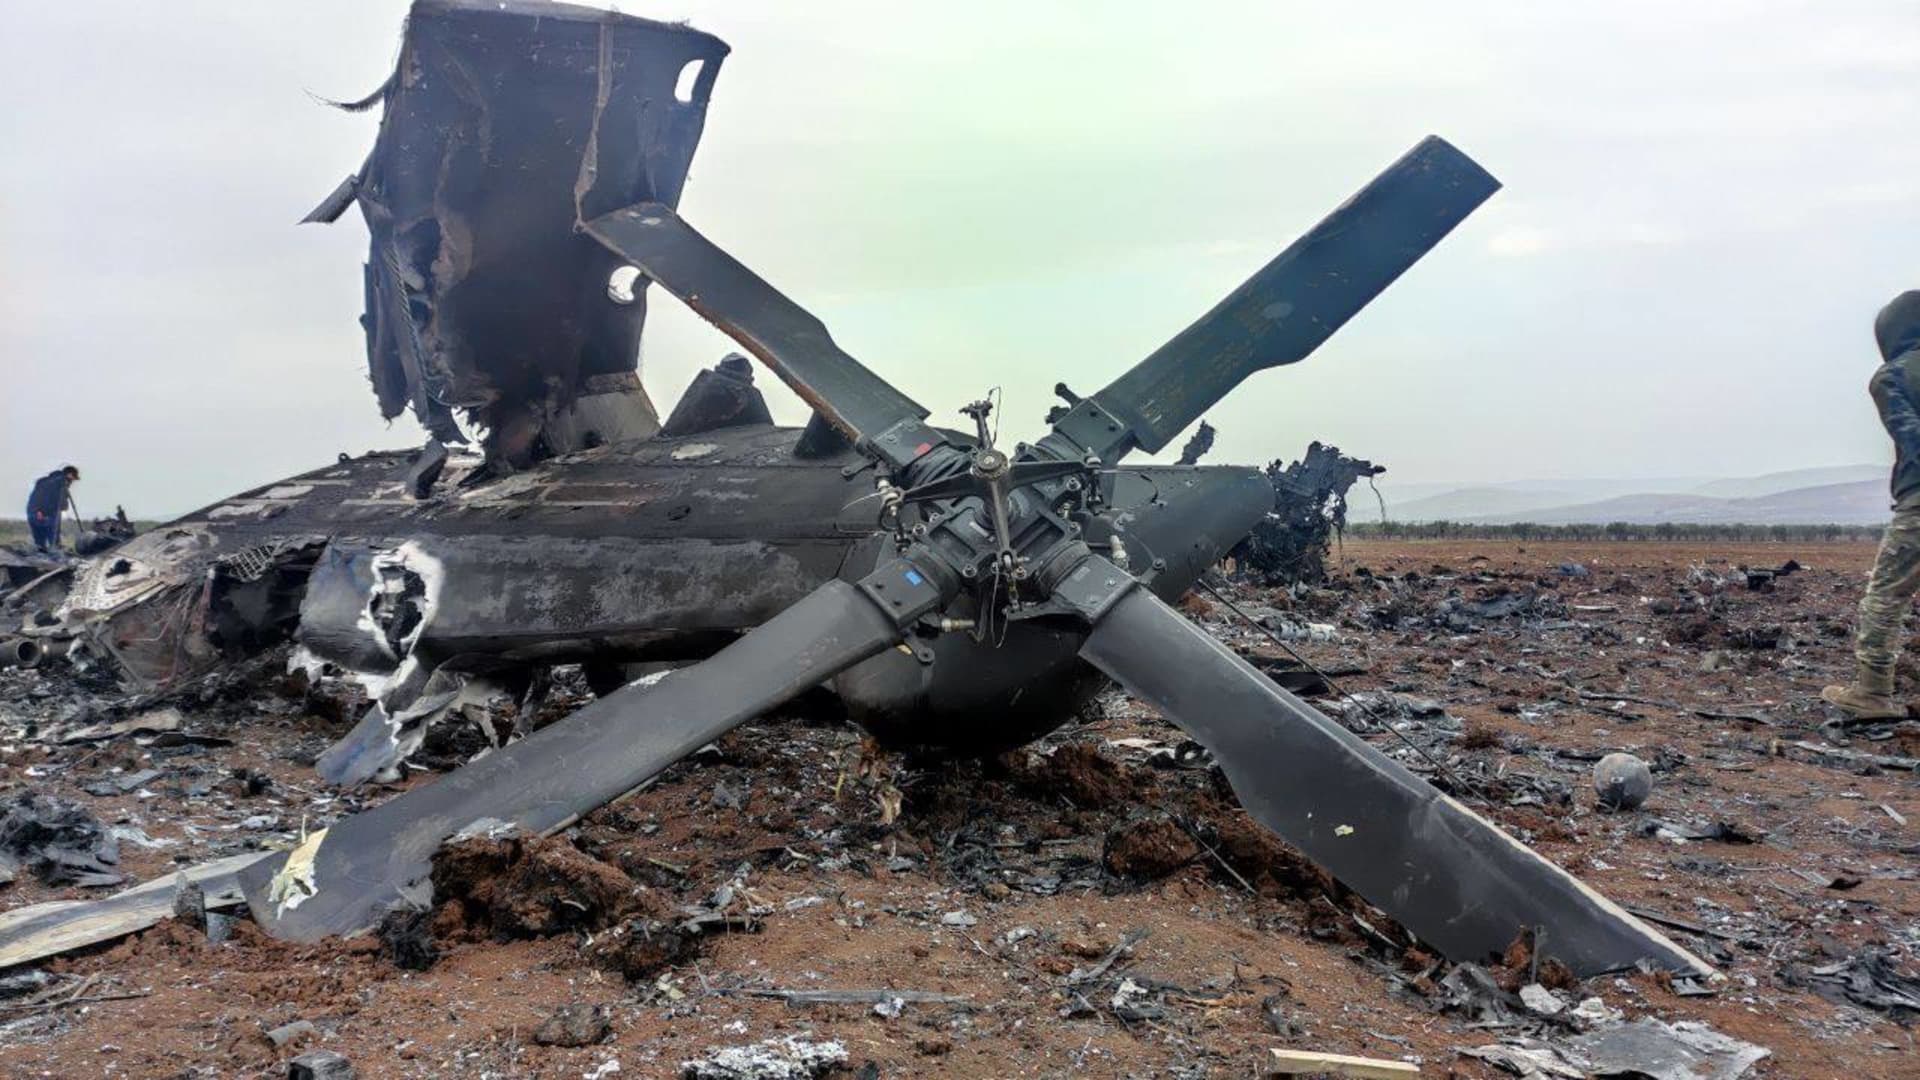 The wreckage of the military helicopter that US forces had to destroy due to technical malfunction during an operation carried out by US forces, is seen near Afrin's Jindires town on February 03, 2022 in Idlib, Syria.